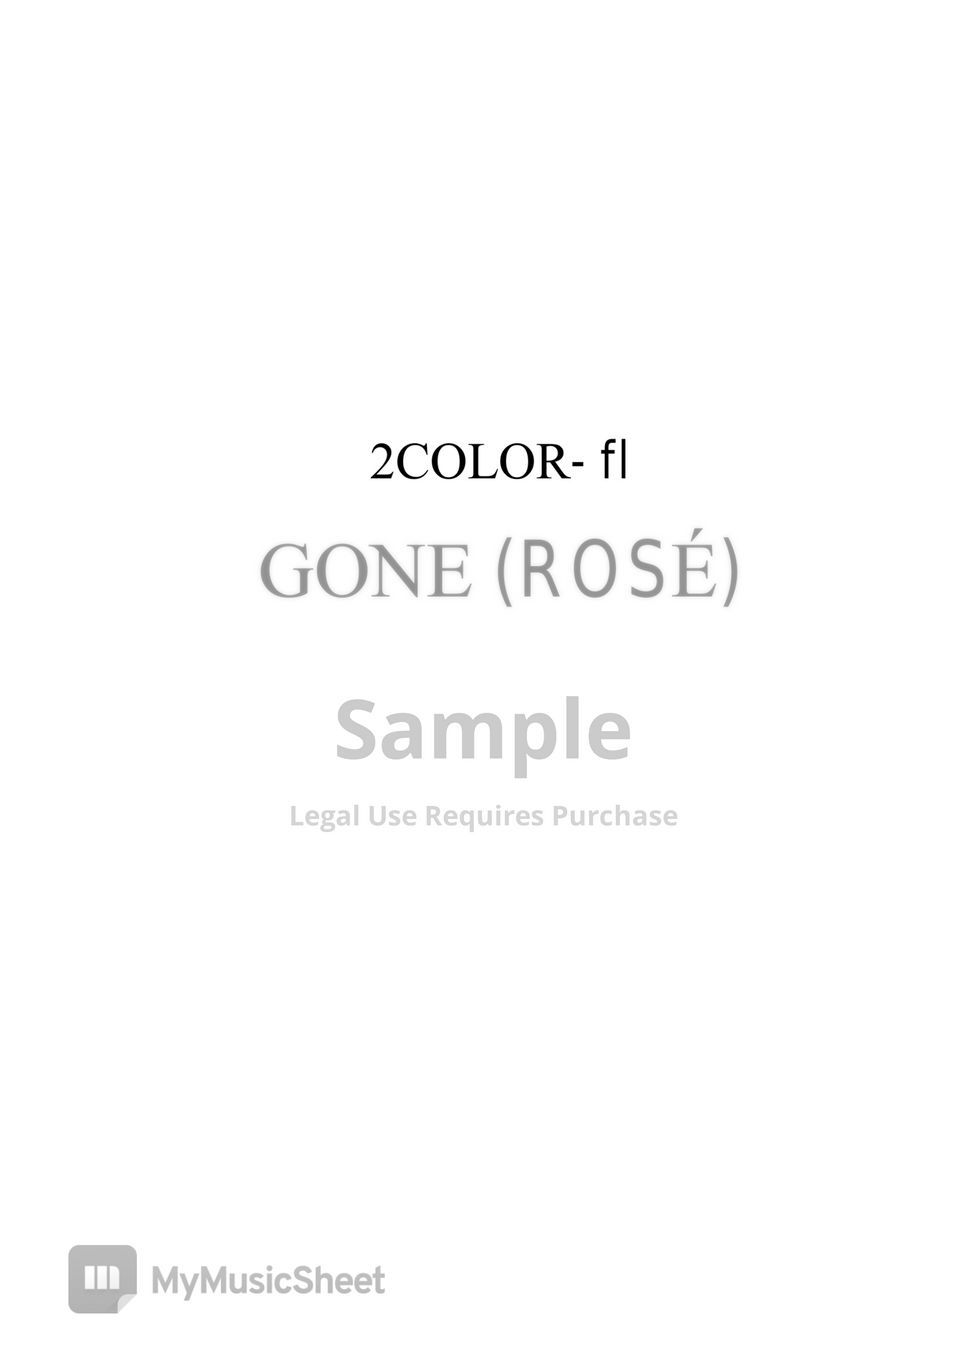 ROSÉ - GONE (로제 solo ) by 2COLOR